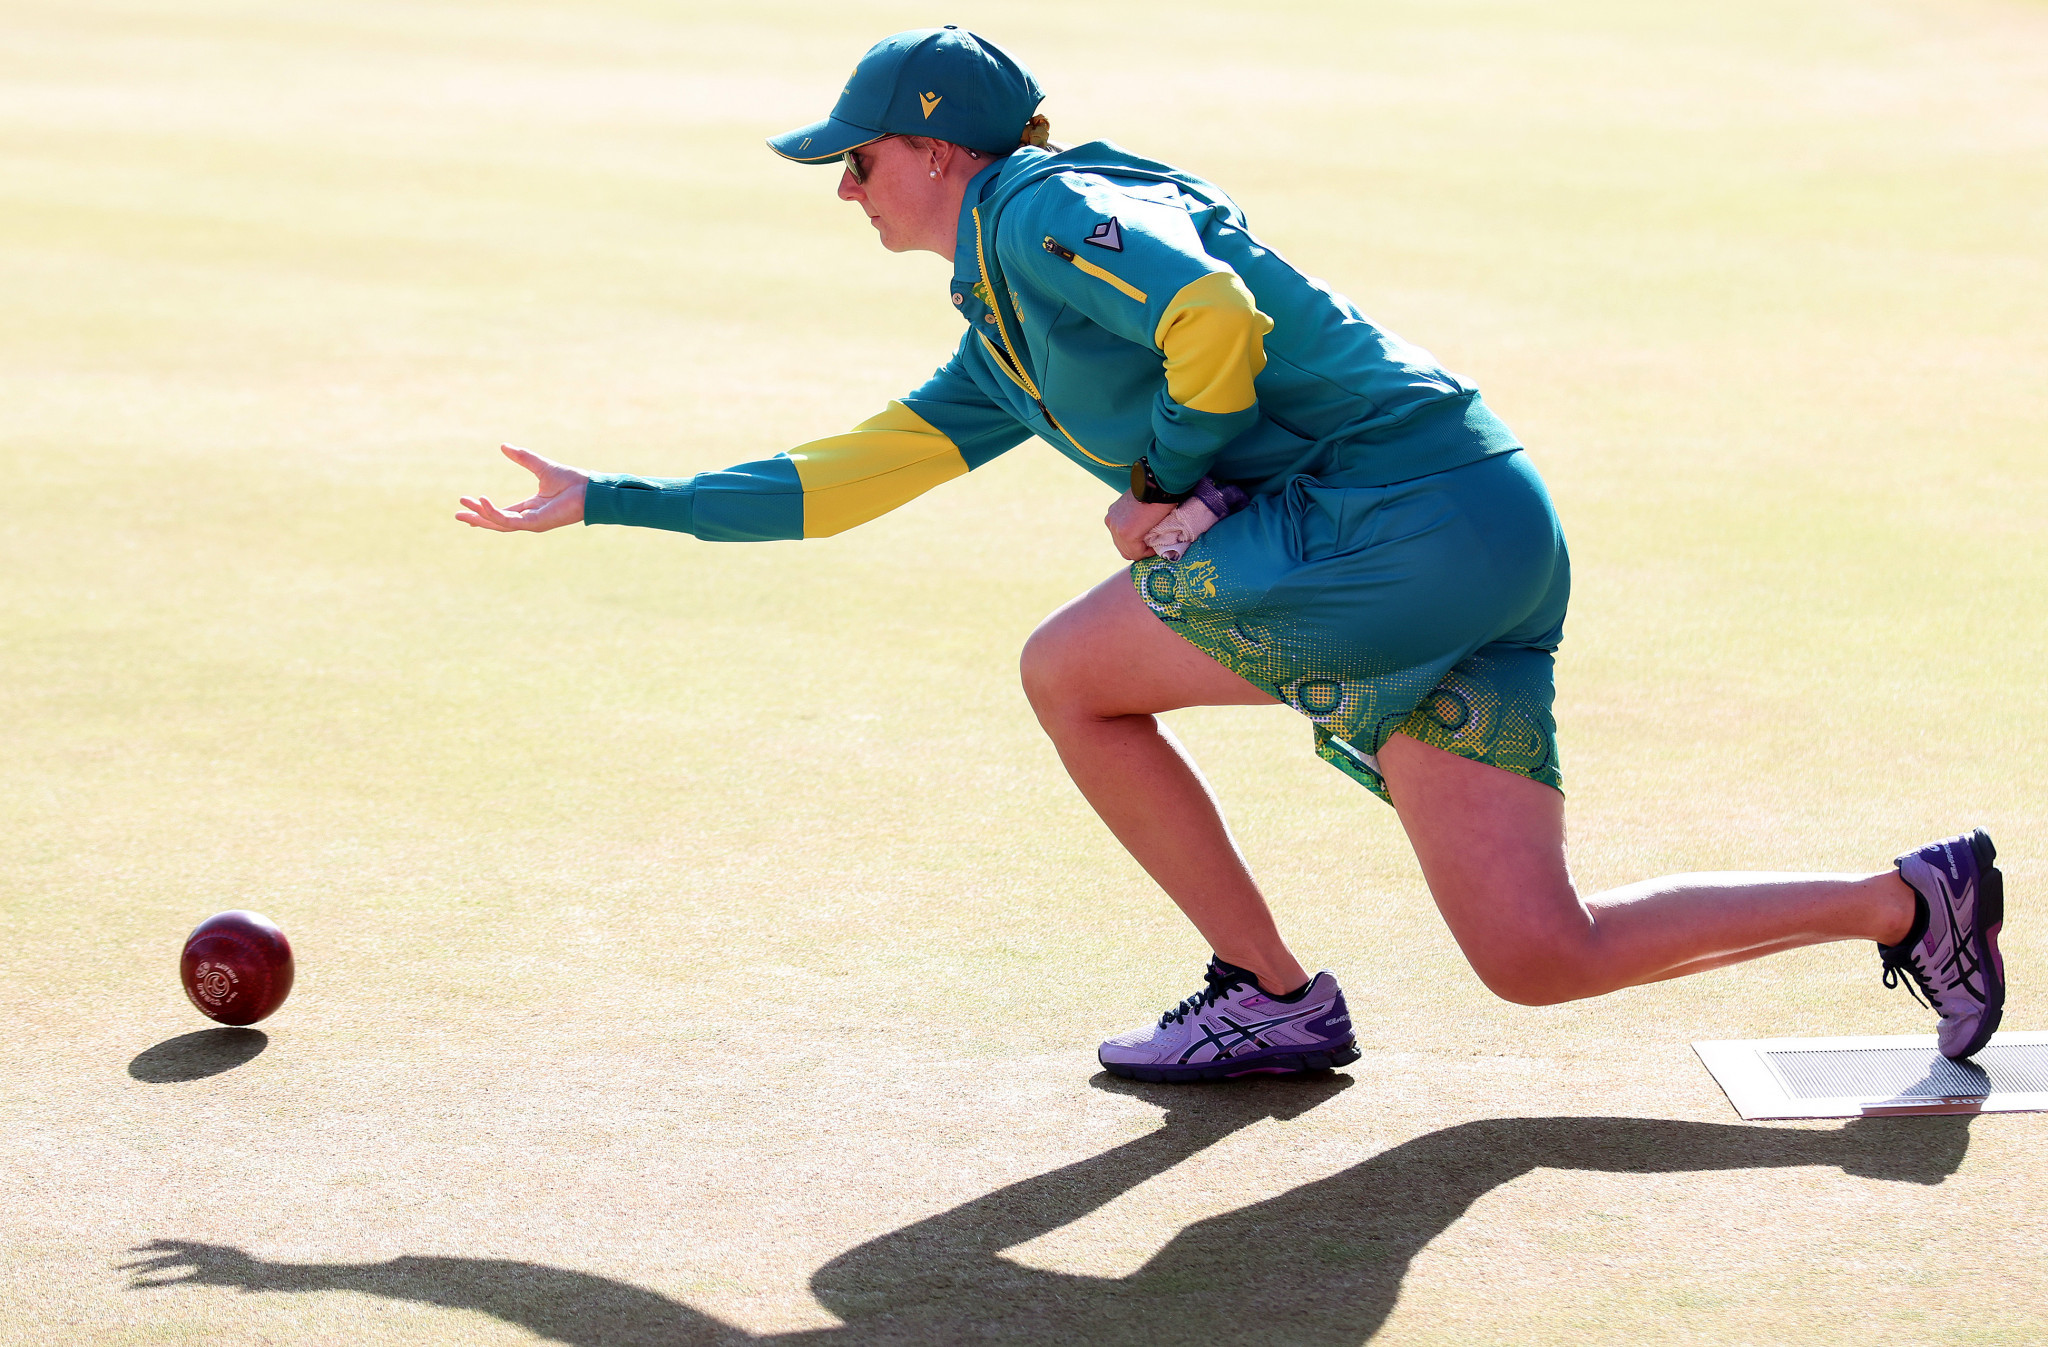 Ryan wins pairs crown in last bowl thriller on final day of Birmingham 2022 lawn bowls